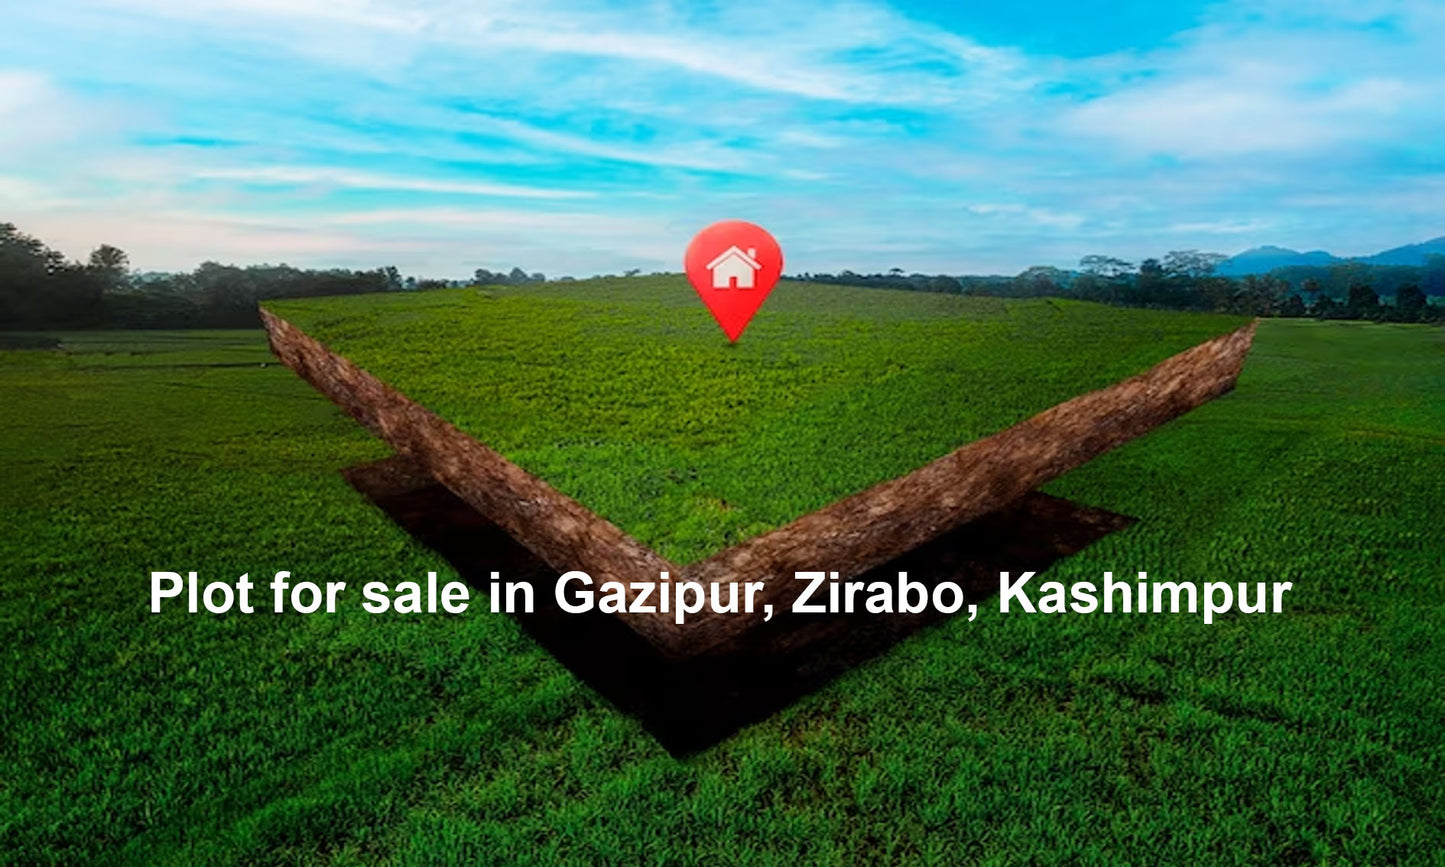 Get This 3.64 Katha Wonderful Plot In Gazipur, Kashimpur Which Is Ready For Sale